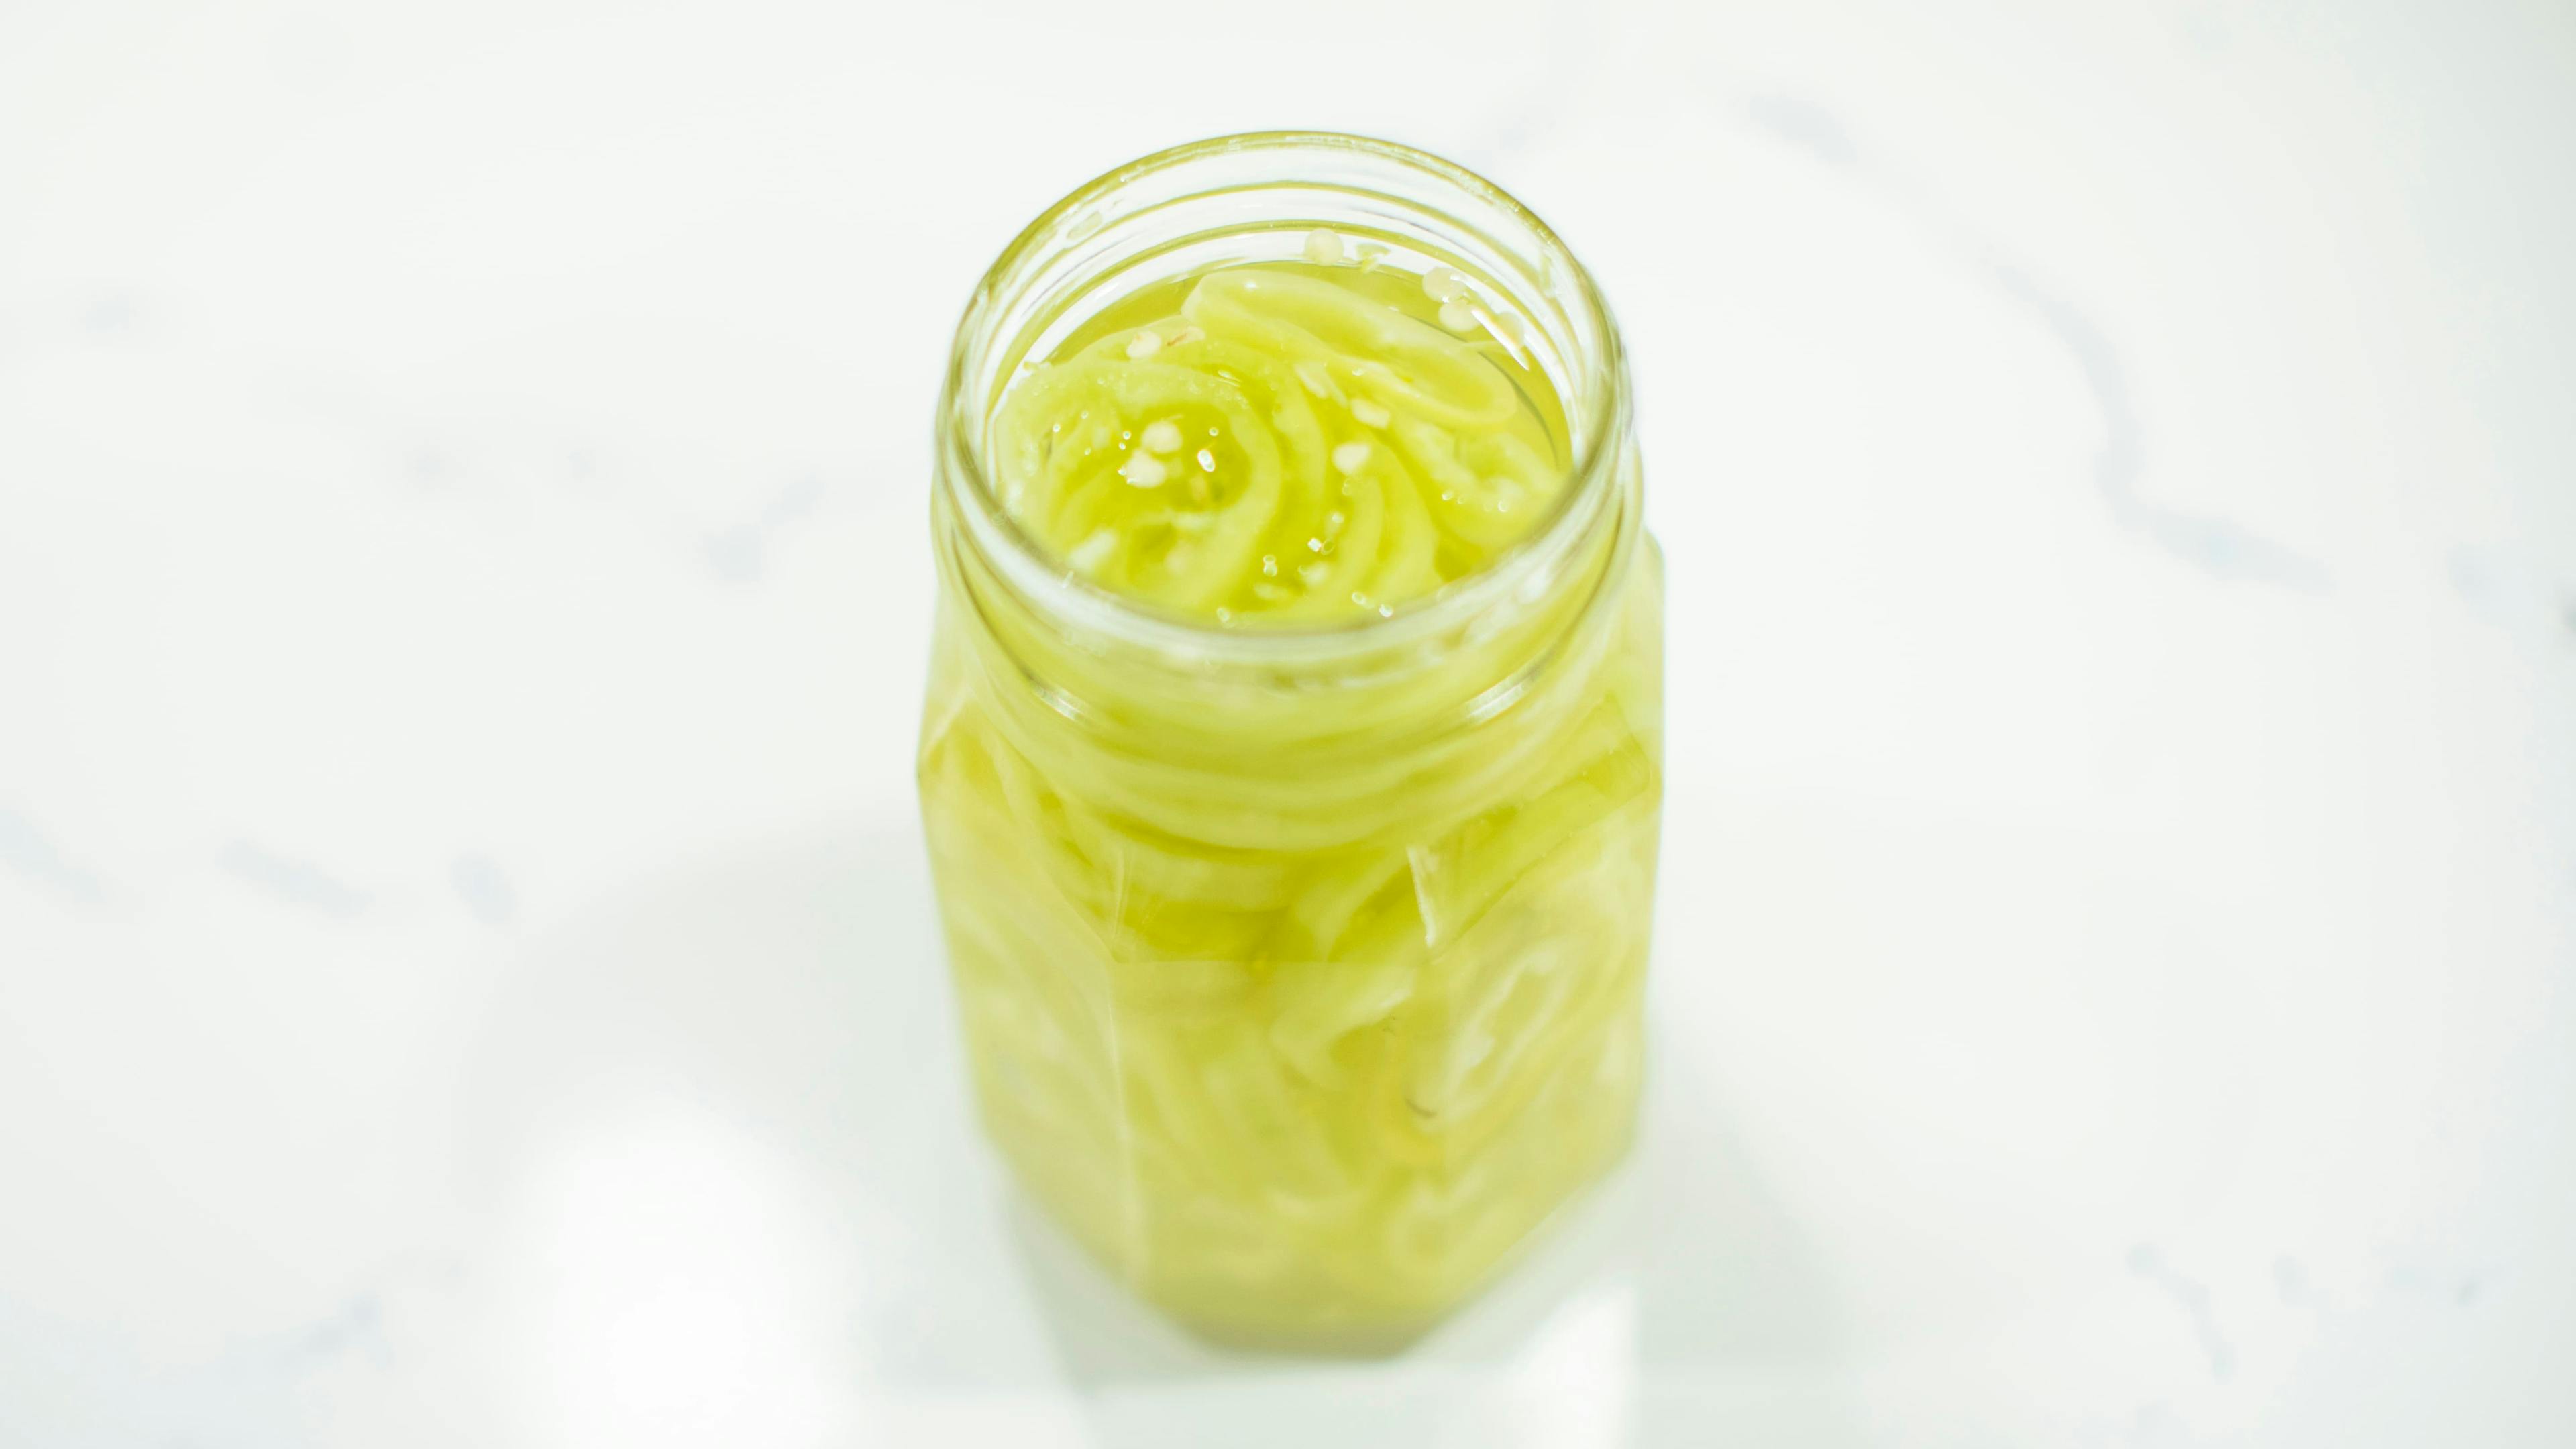 The Holly Furtick recipe: 'Pickled Peppers'